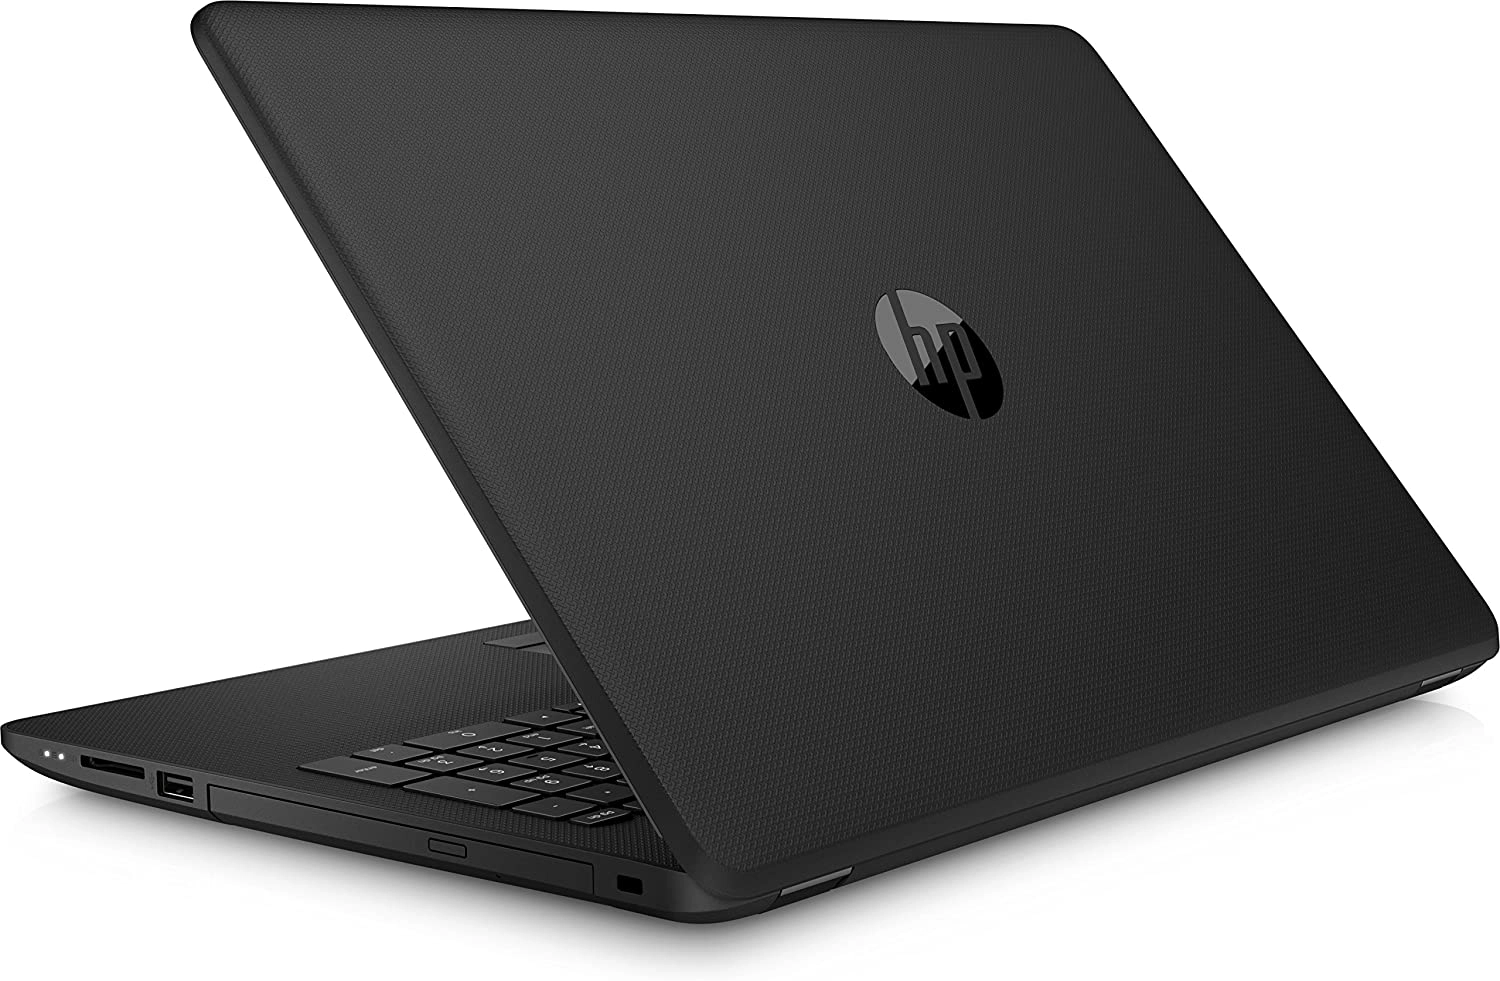 HP 15-bs130ns laptop image